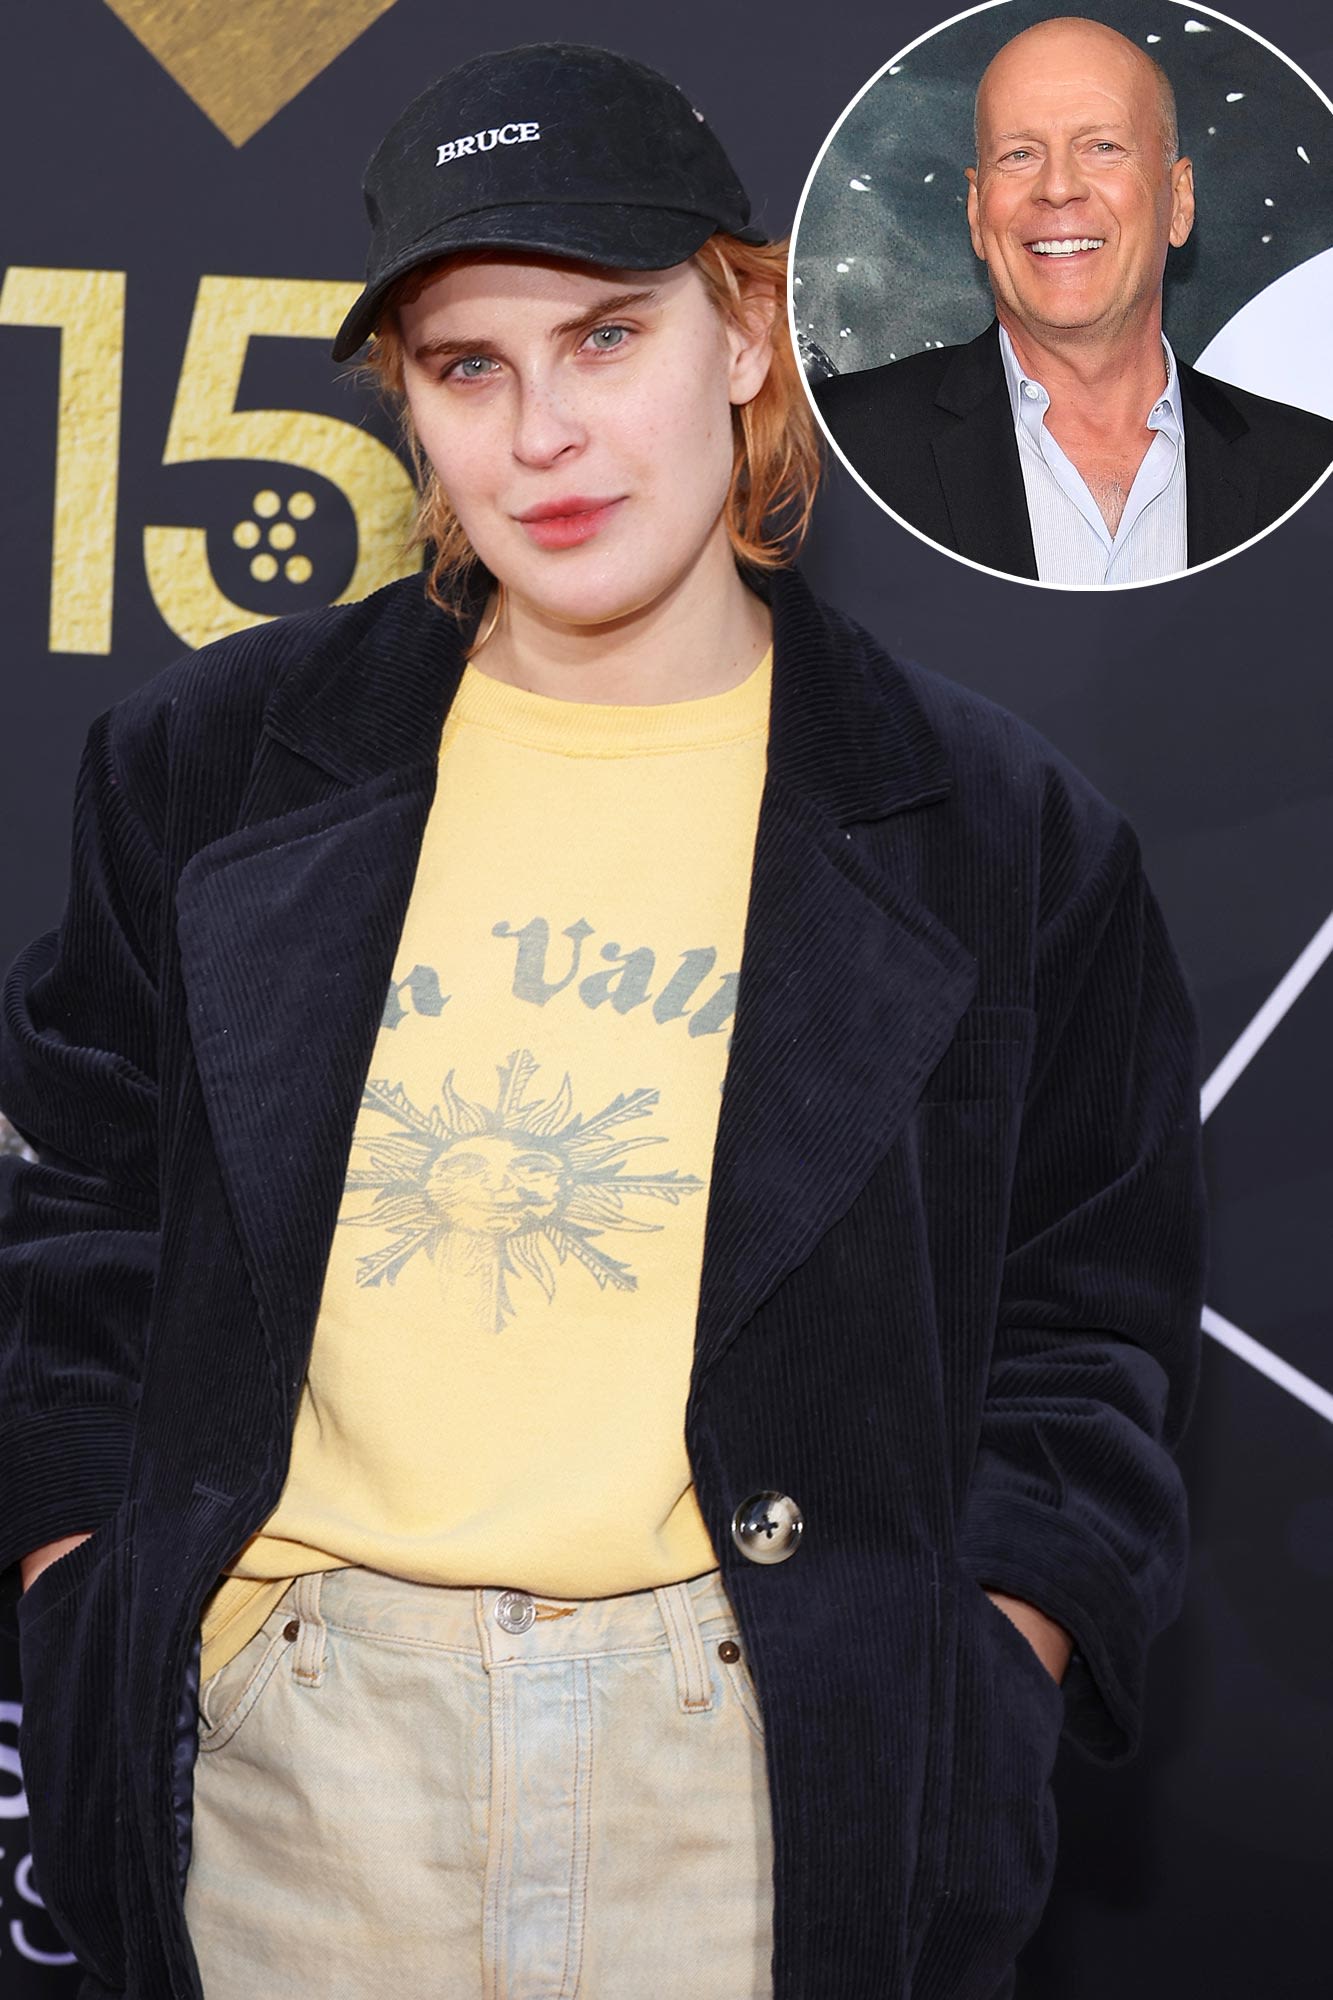 Tallulah Willis Wears Sweet ‘Bruce’ Hat at ‘Pulp Fiction’ 30th Anniversary Reunion Event